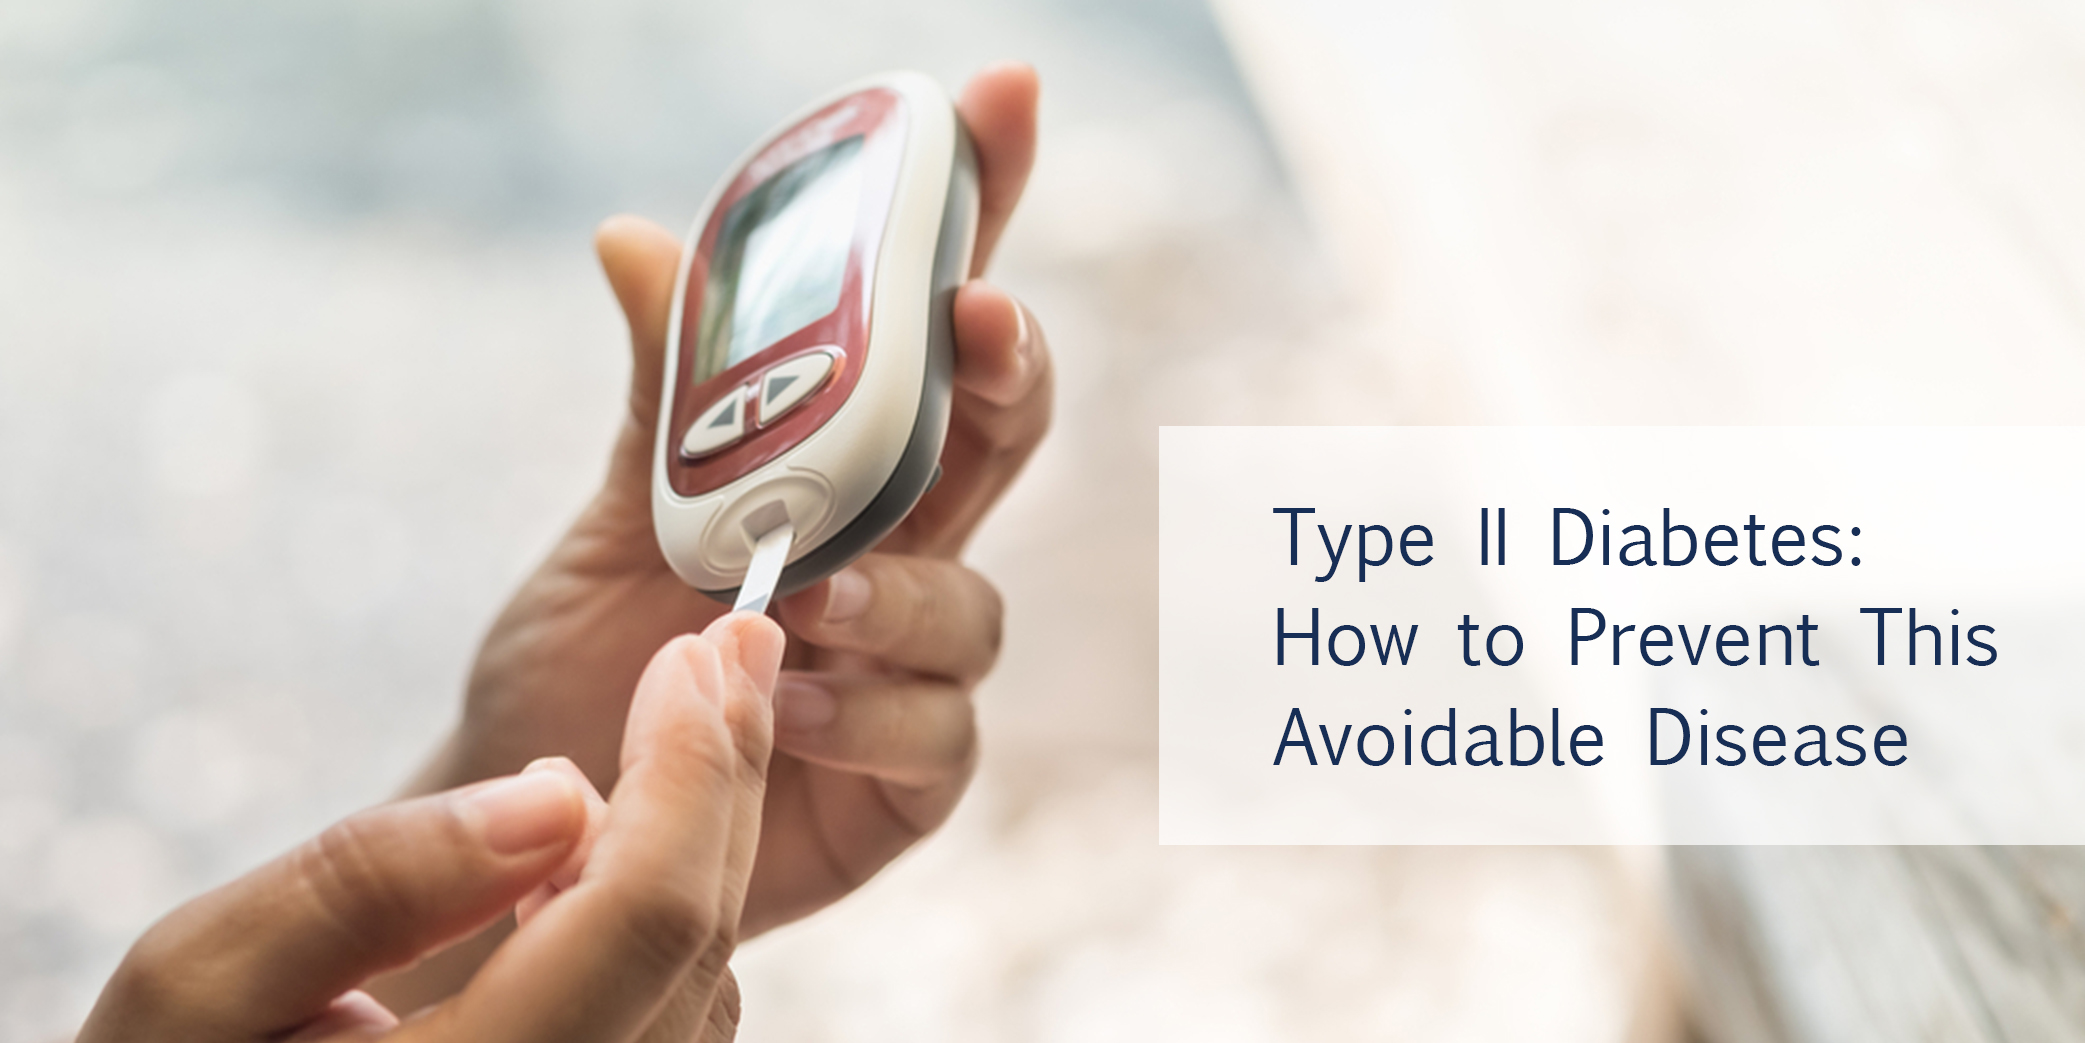 Diabetes: How to prevent this avoidable disease